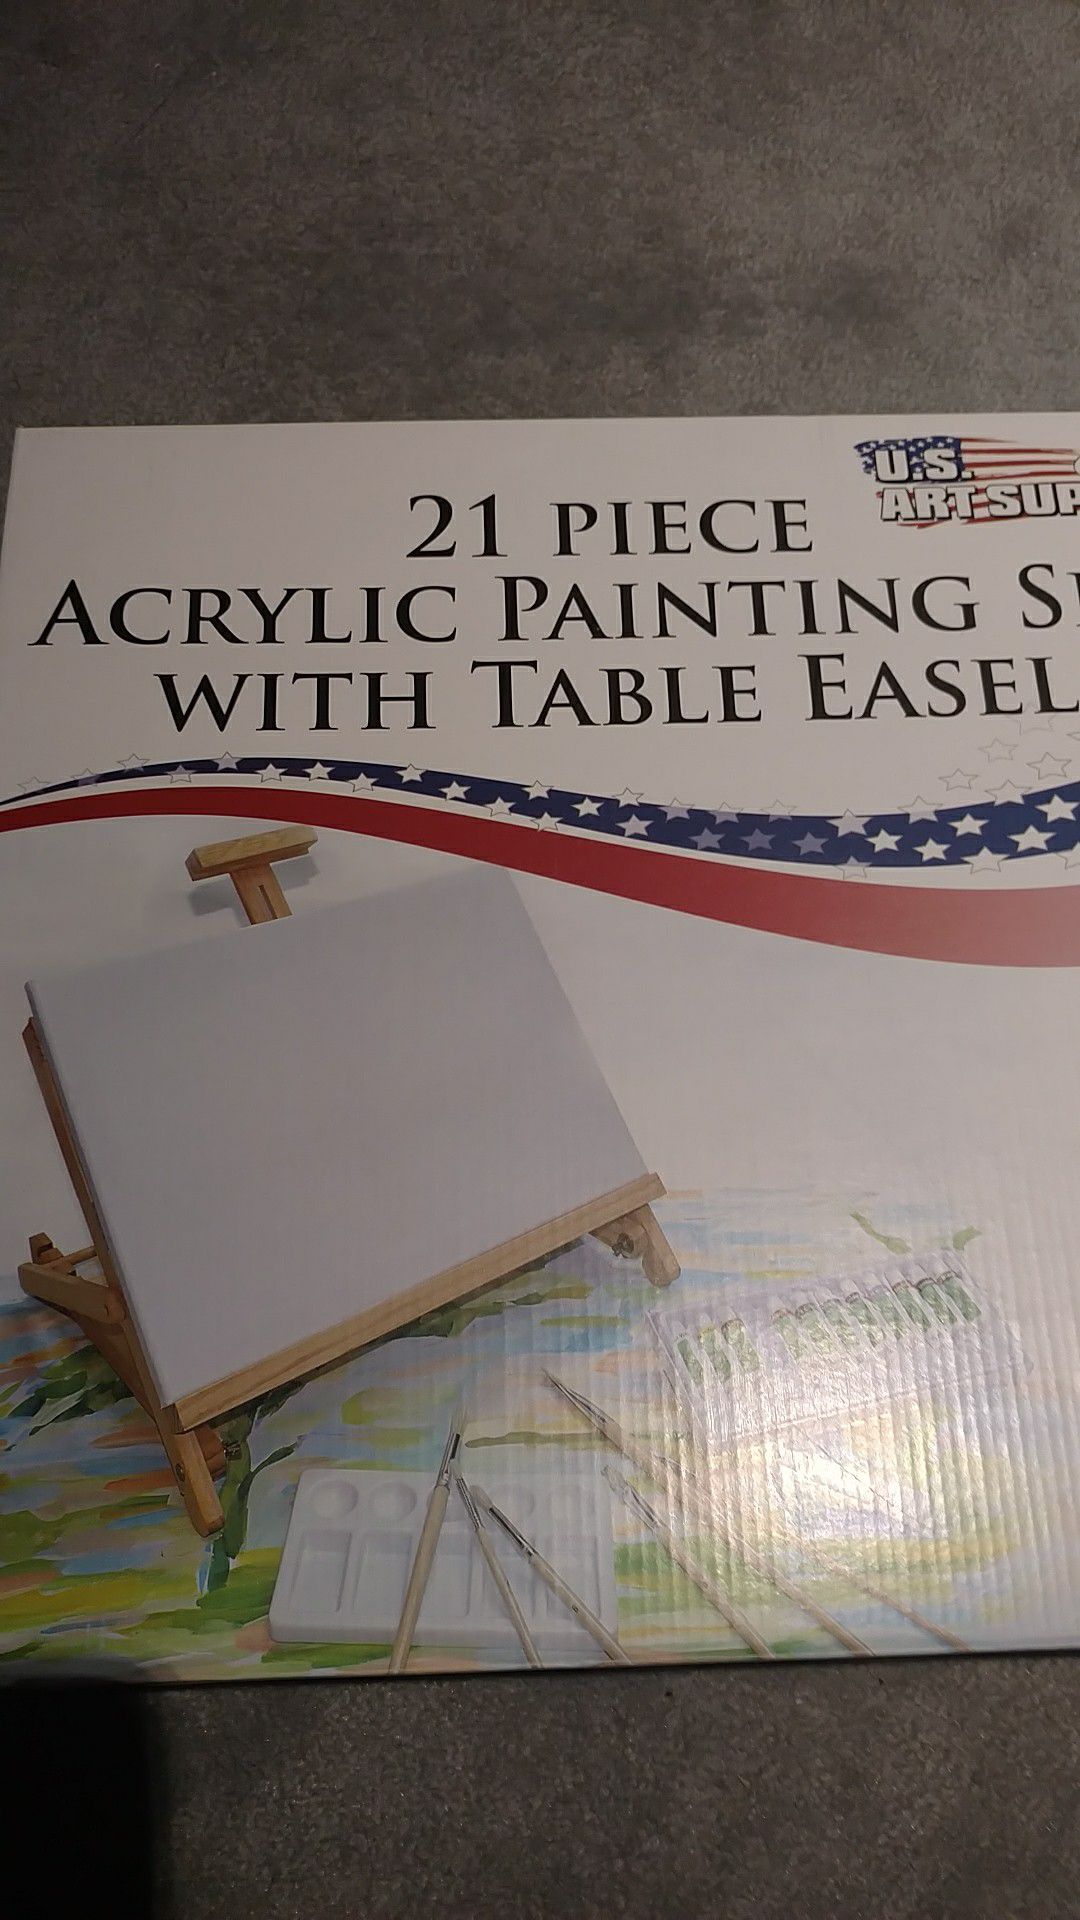 21 Piece Acrylic Painting Set with Table Easel v